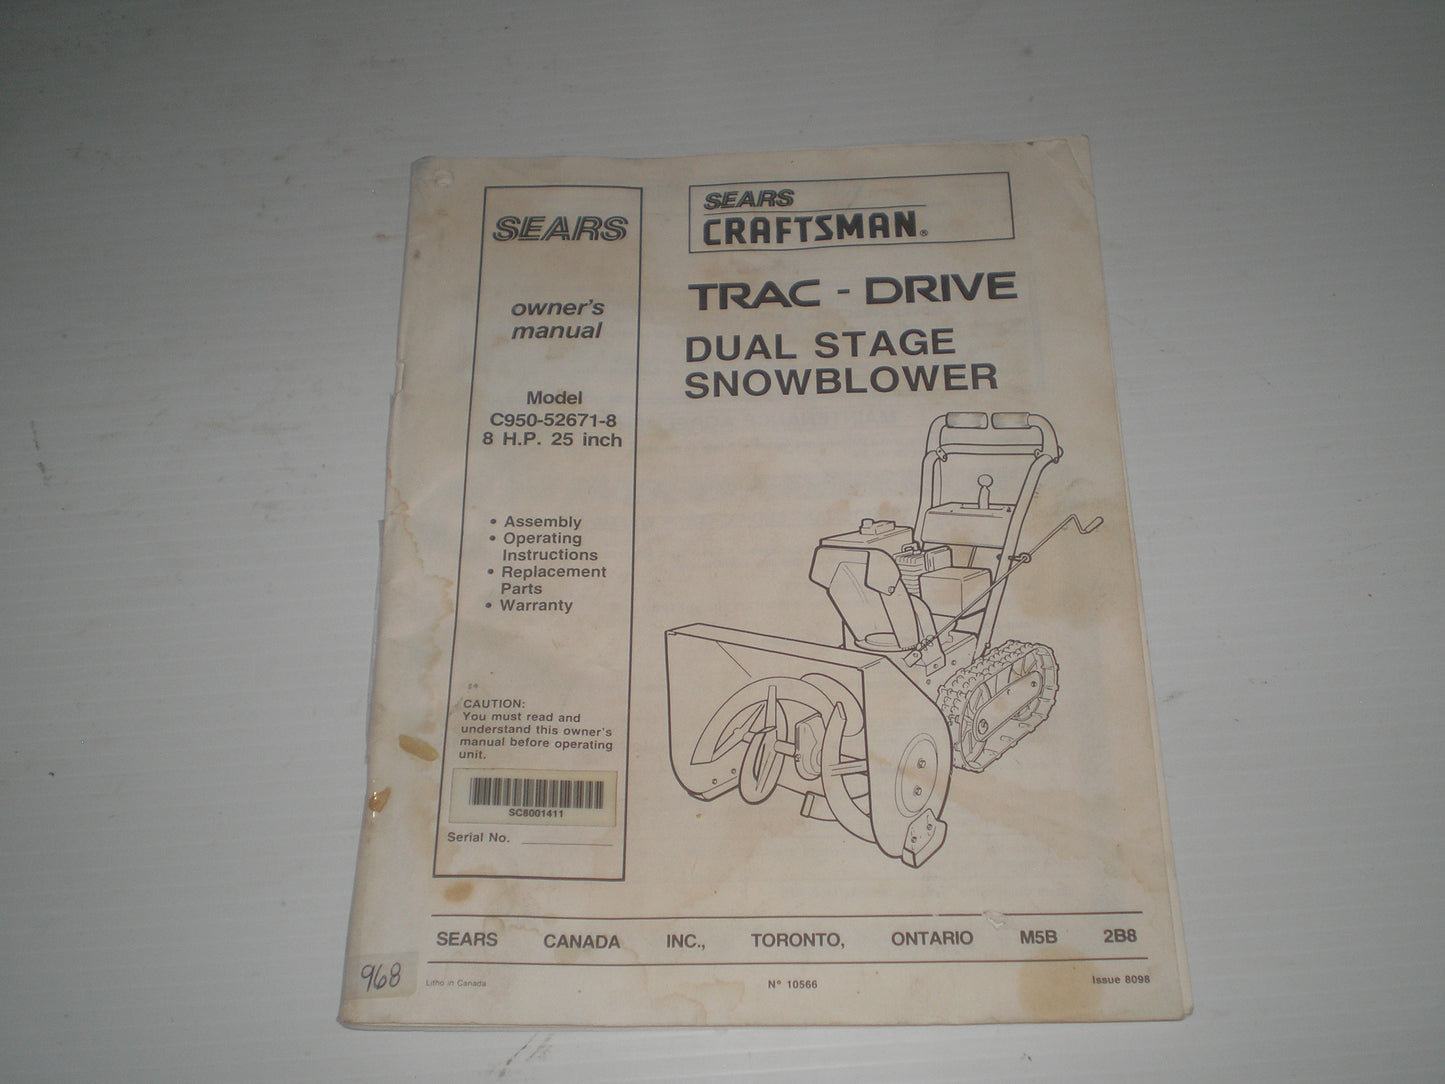 Sears CRAFTSMAN Trac-Drive Dual Stage Snowblower 8HP Owner's Manual  C950-52671-8  #968